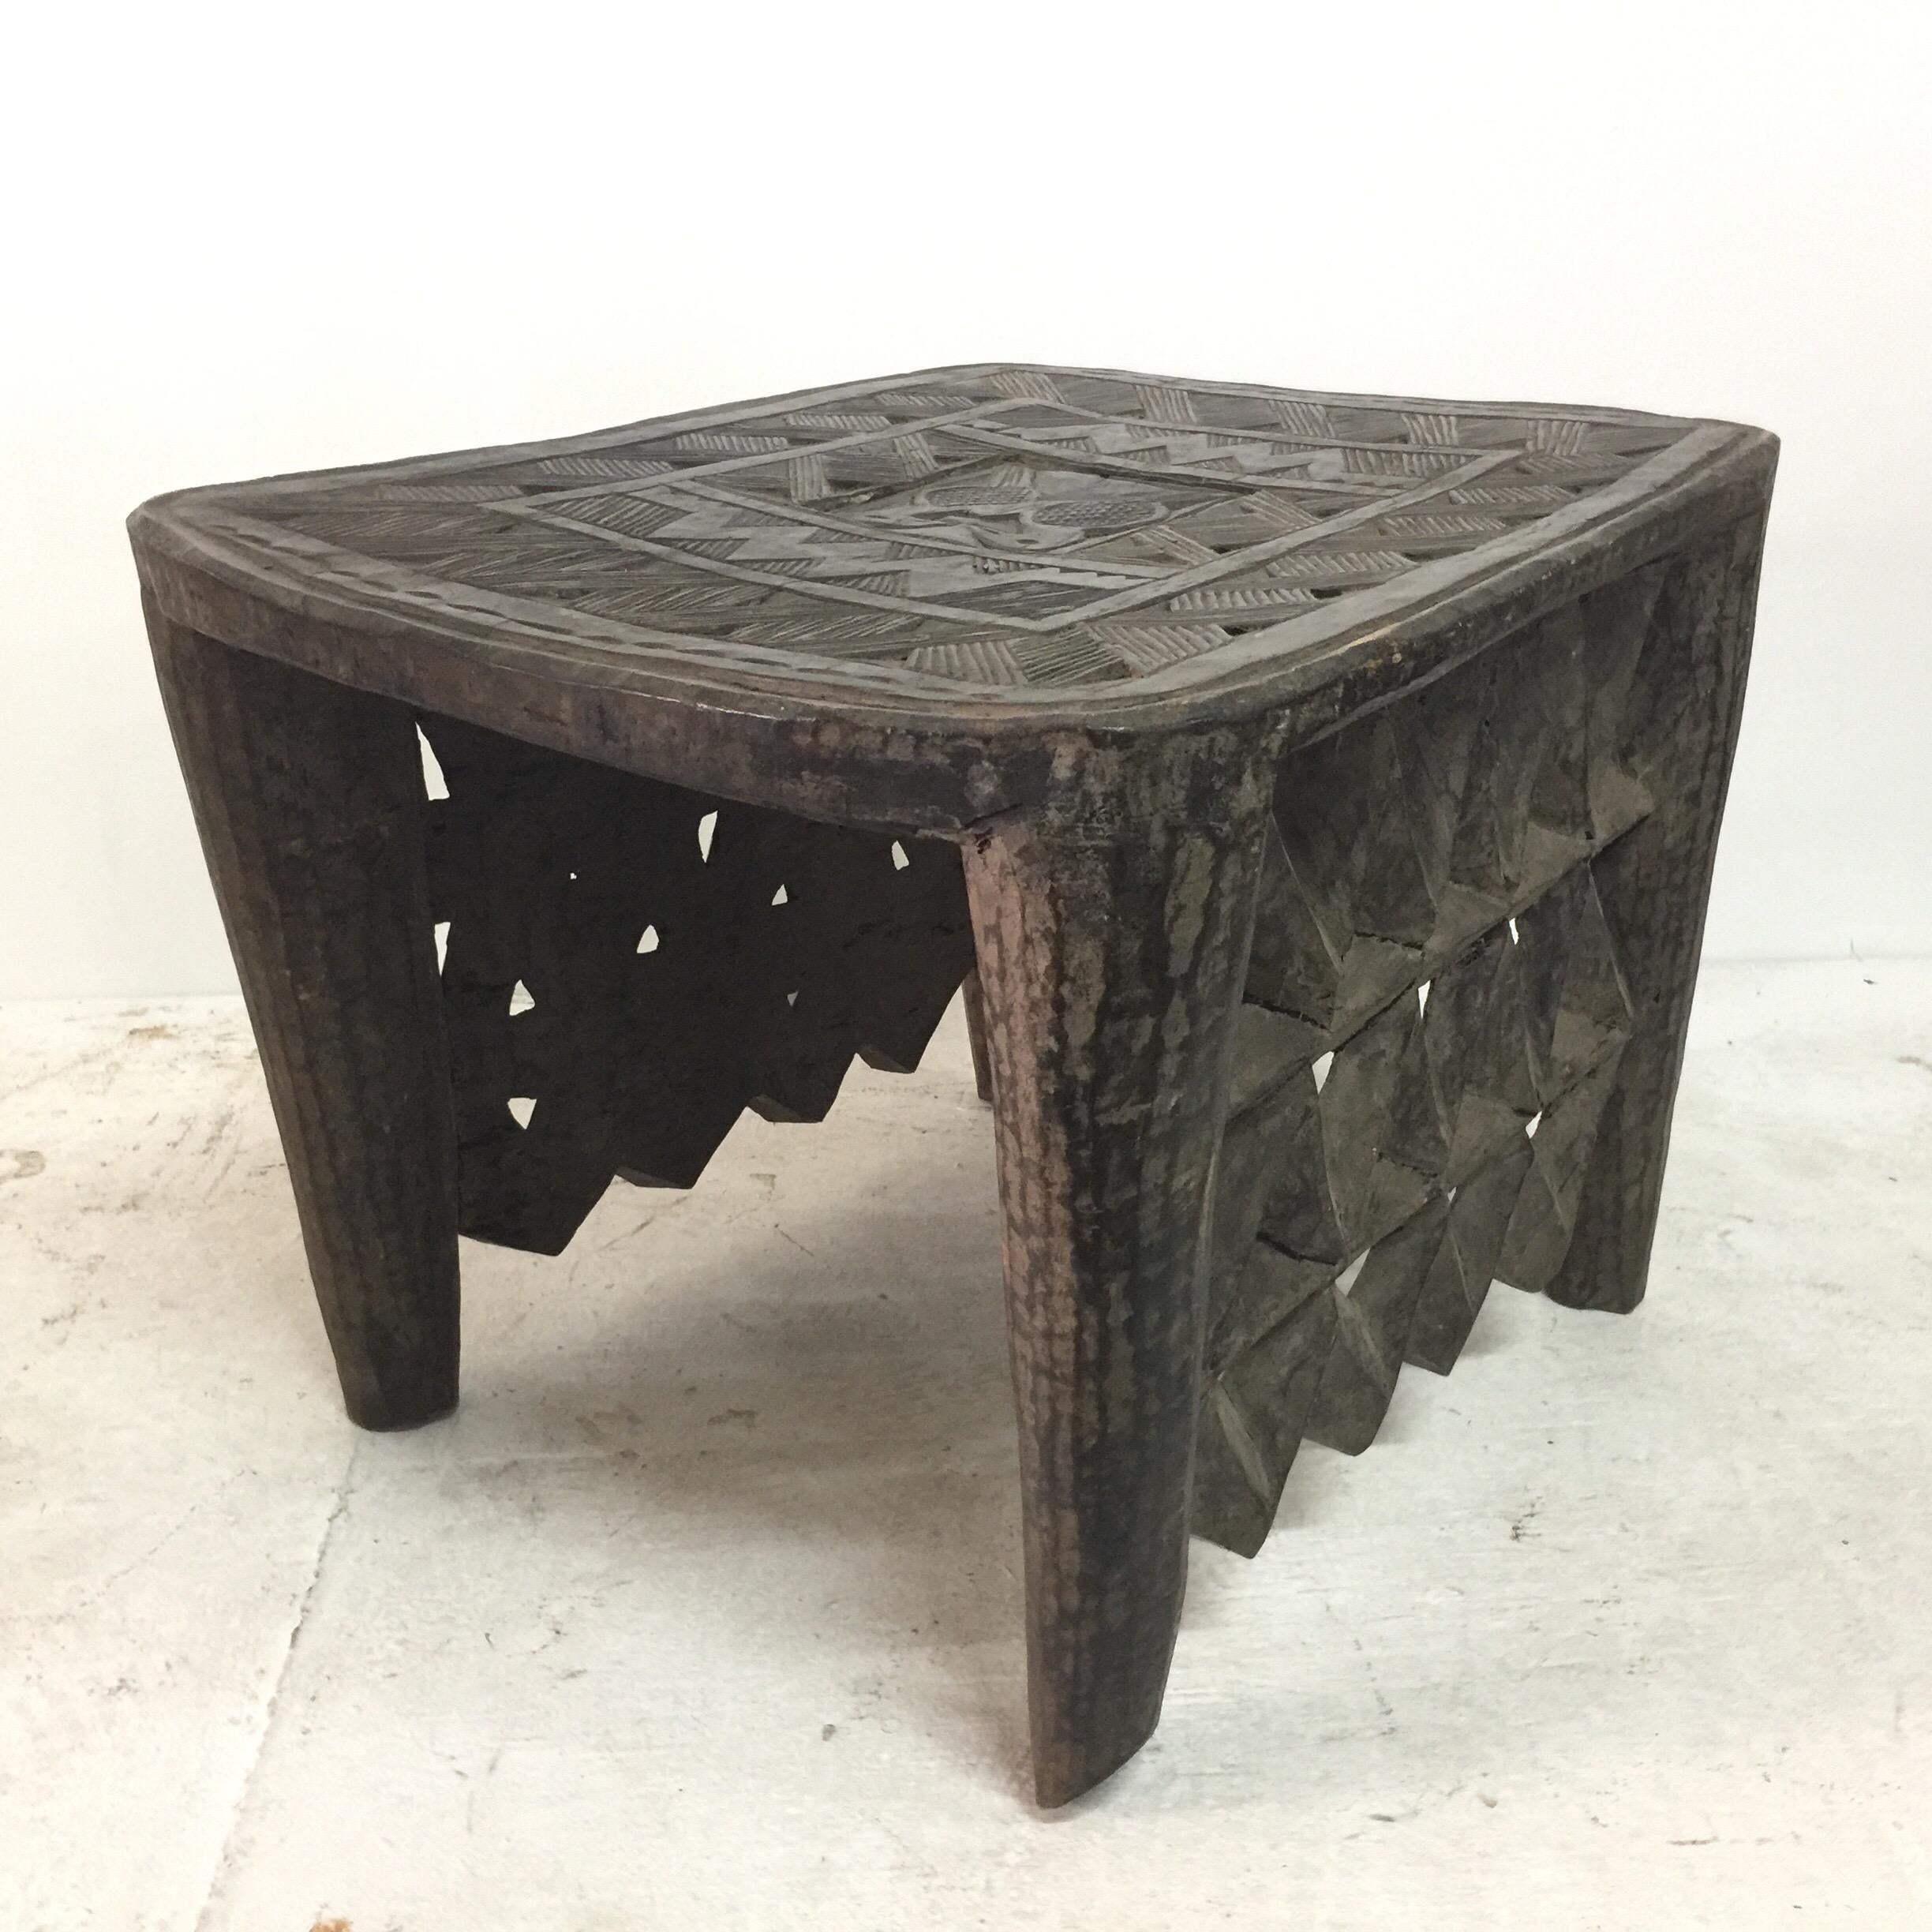 This beautifully carved African tribal table has two lateral sides fully carved to floor and two open sides (see detail images). The center top has a hidden compartment. Great as a bench or side table!